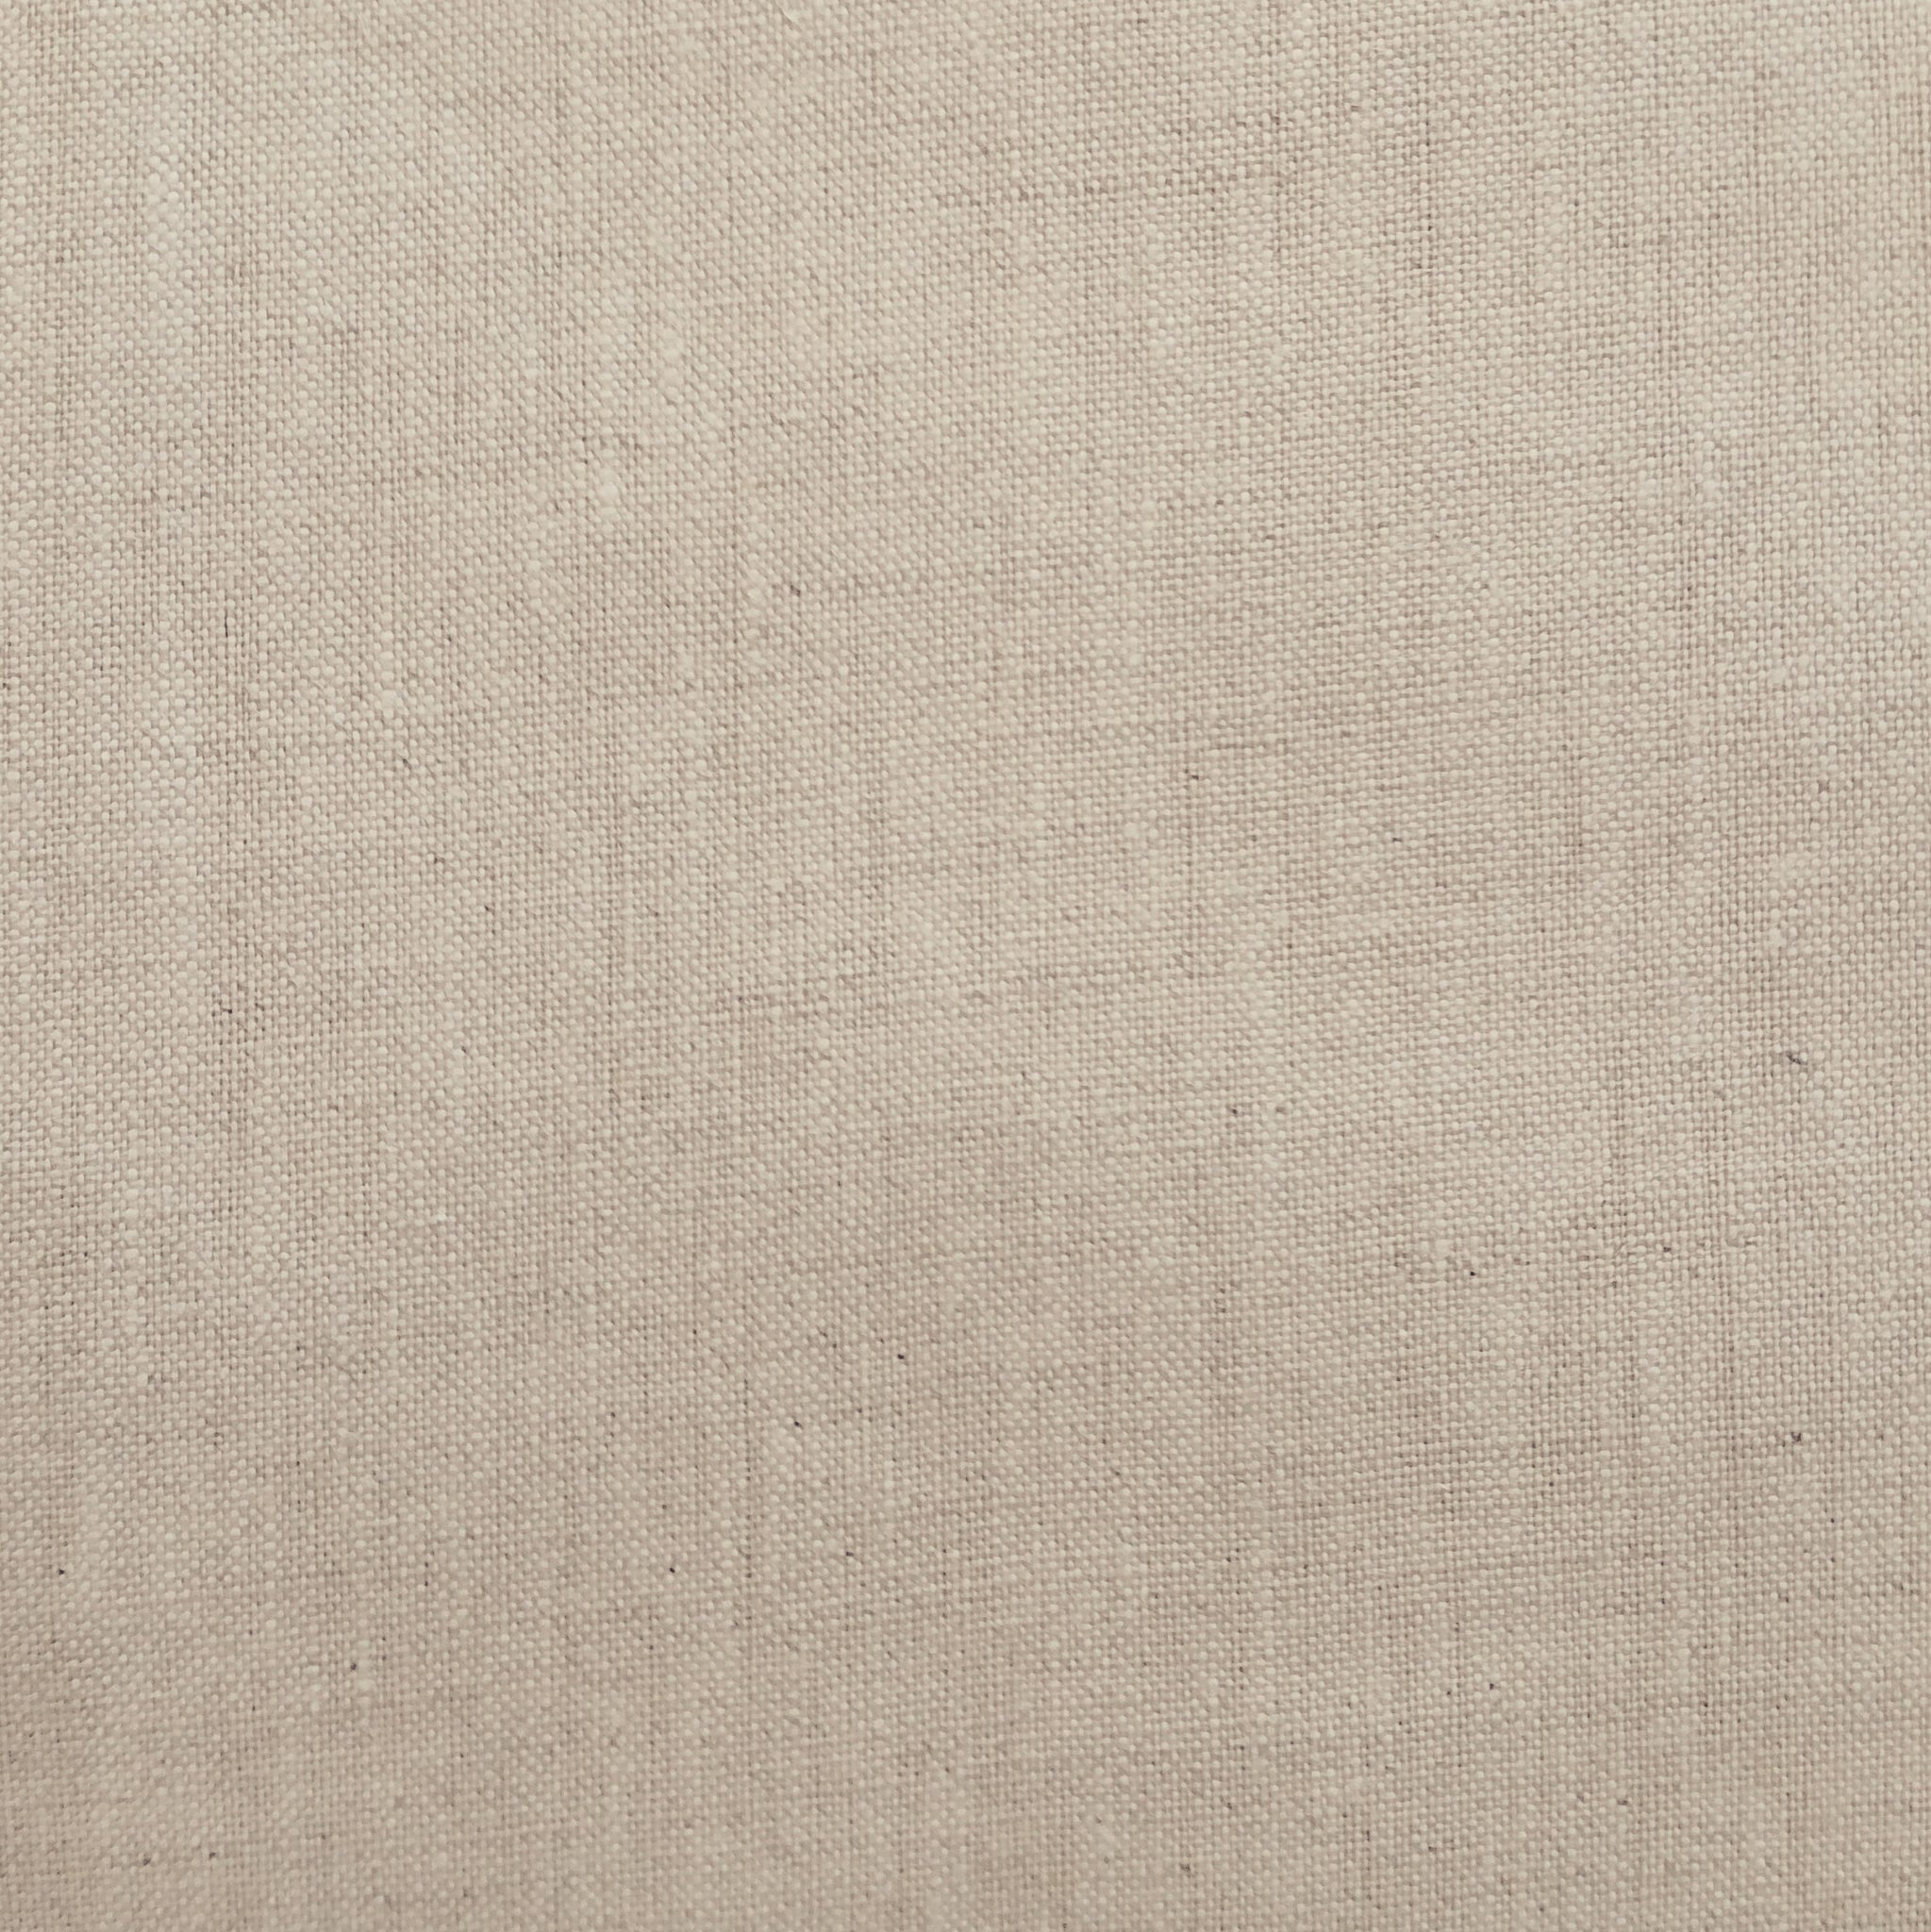 Suitable for shorts, pants, dresses, jackets.  This is our go to medium weight Linen.  100% Linen, 58" wide.  ALL FABRICS ARE PRICED BY THE HALF YARD.  PLEASE ORDER IN QUANTITIES OF 1/2 YARD.  WE WILL CUT IN ONE PIECE.